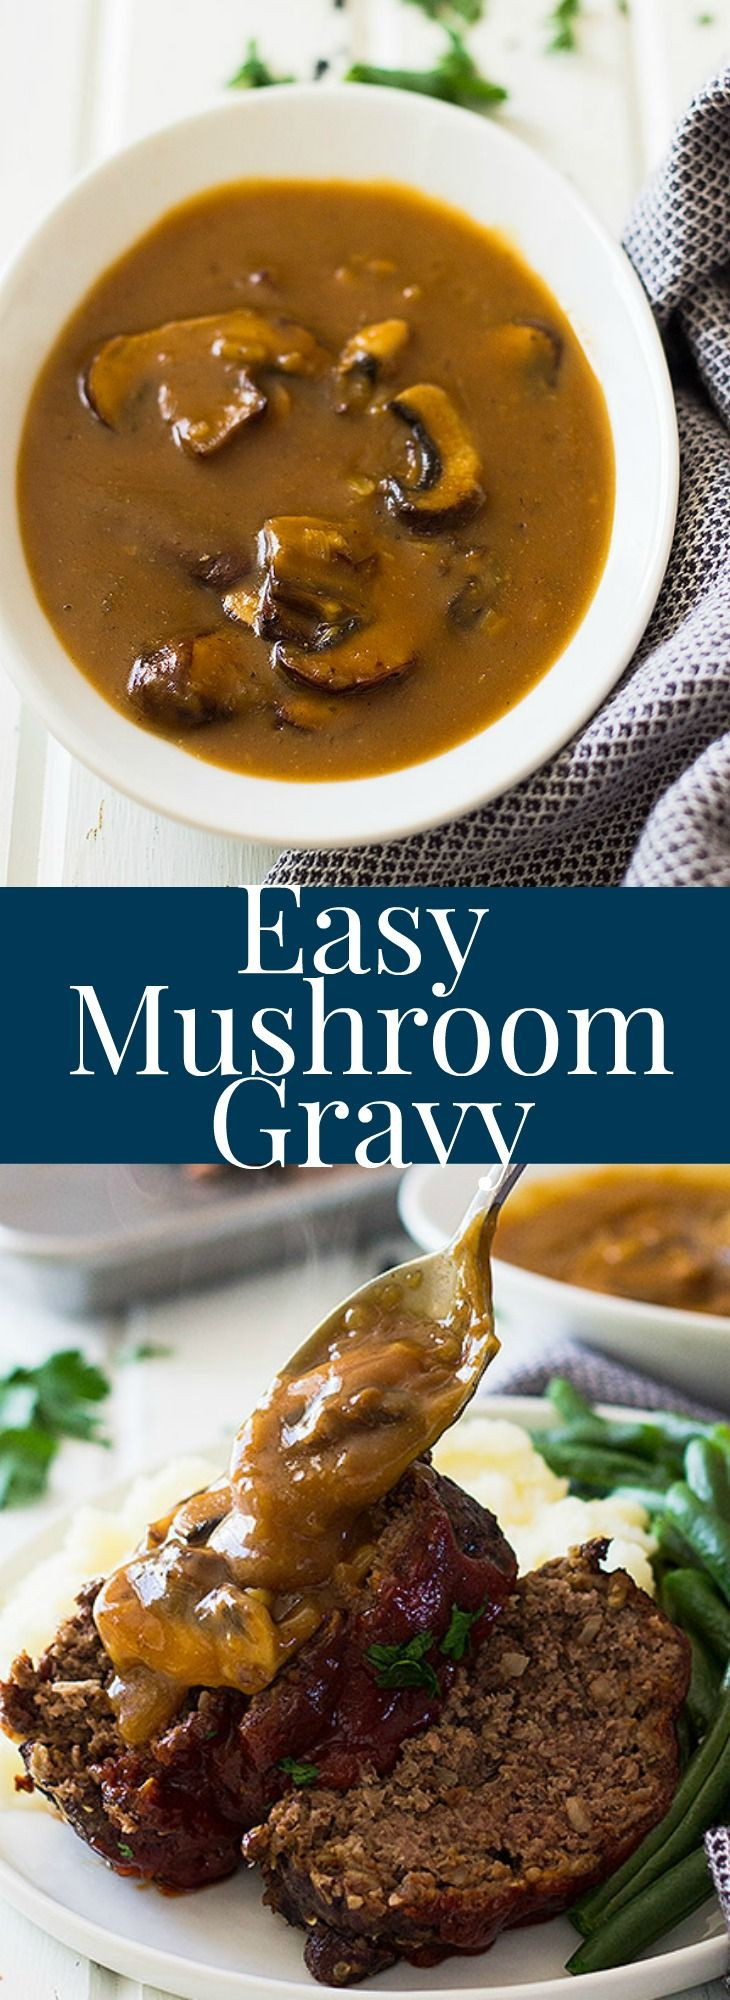 Quick And Easy Mushroom Recipes
 This Easy Mushroom Gravy is quick and simple It is